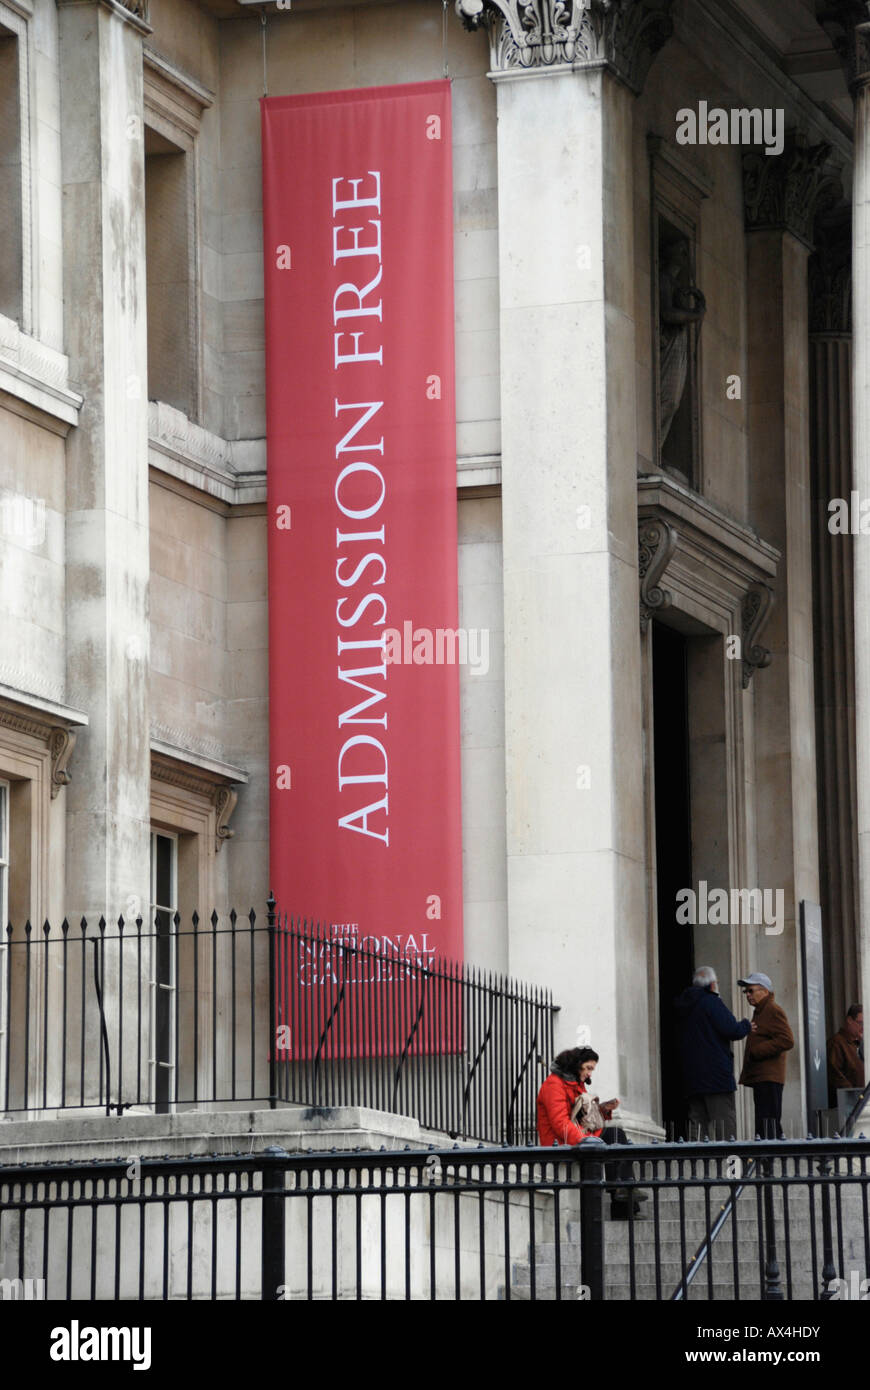 Admission Free Banner outside the National Gallery London Stock Photo